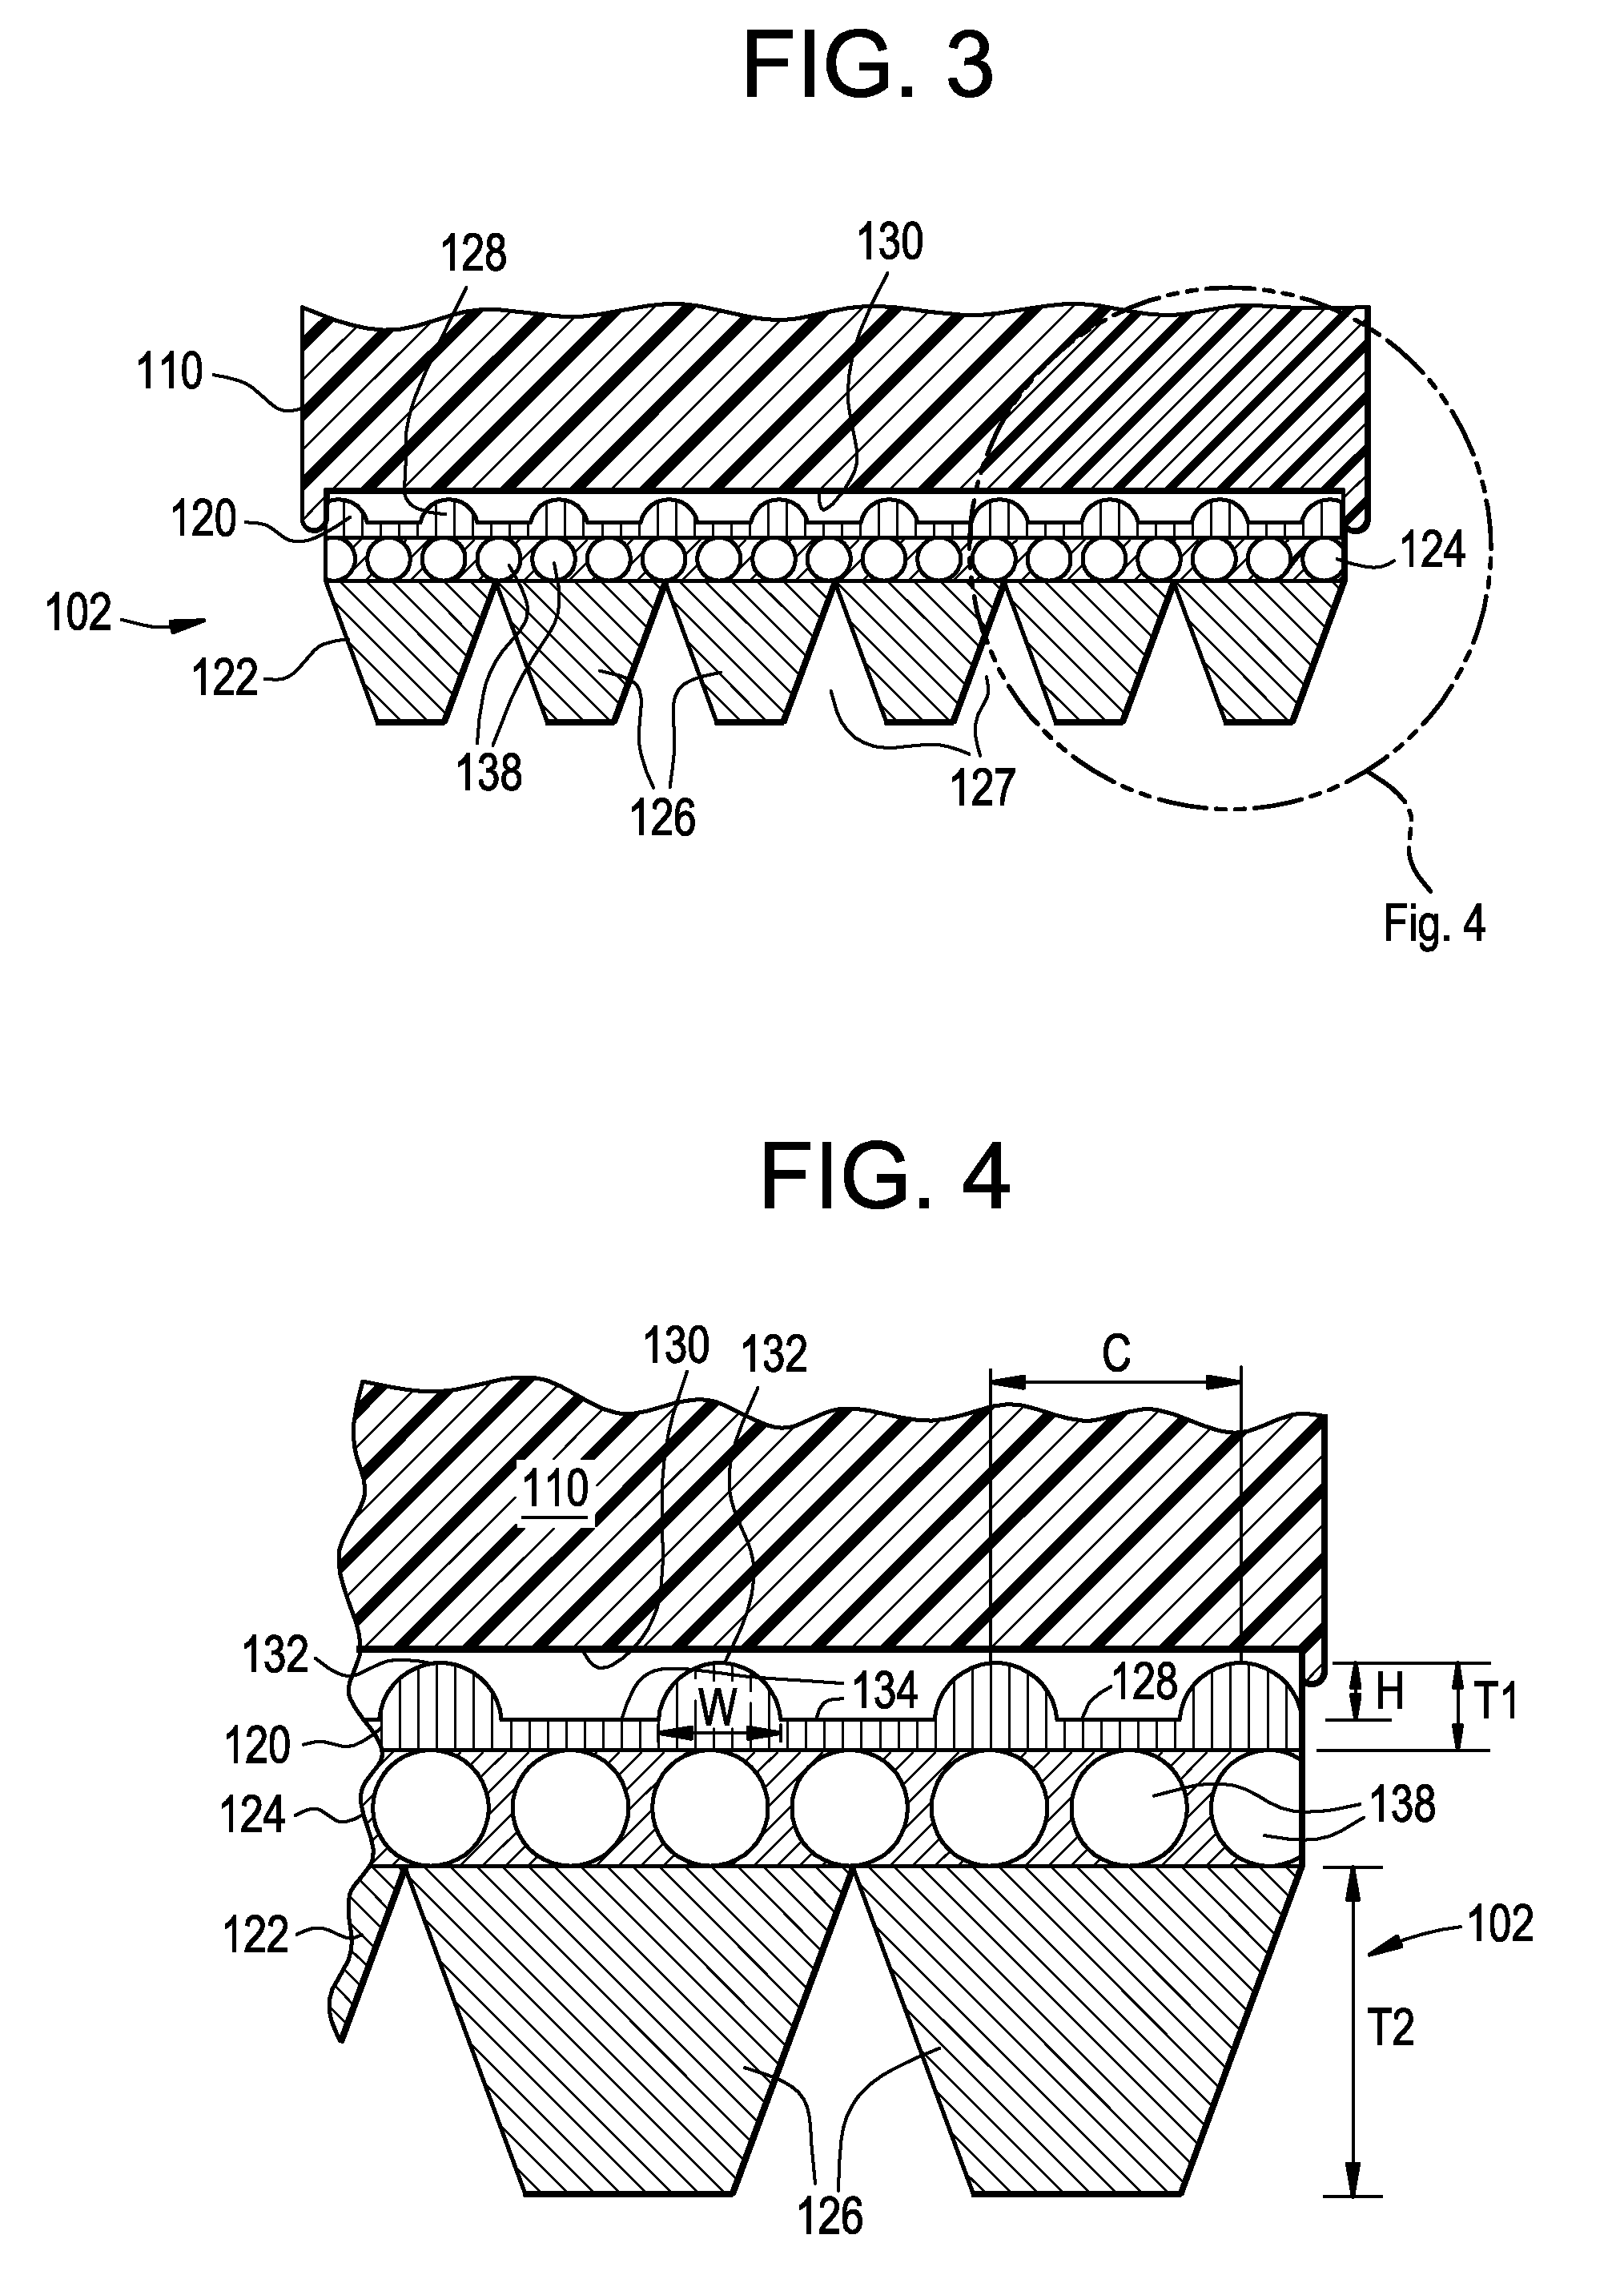 V-ribbed belt having an outer surface with improved coefficient of friction